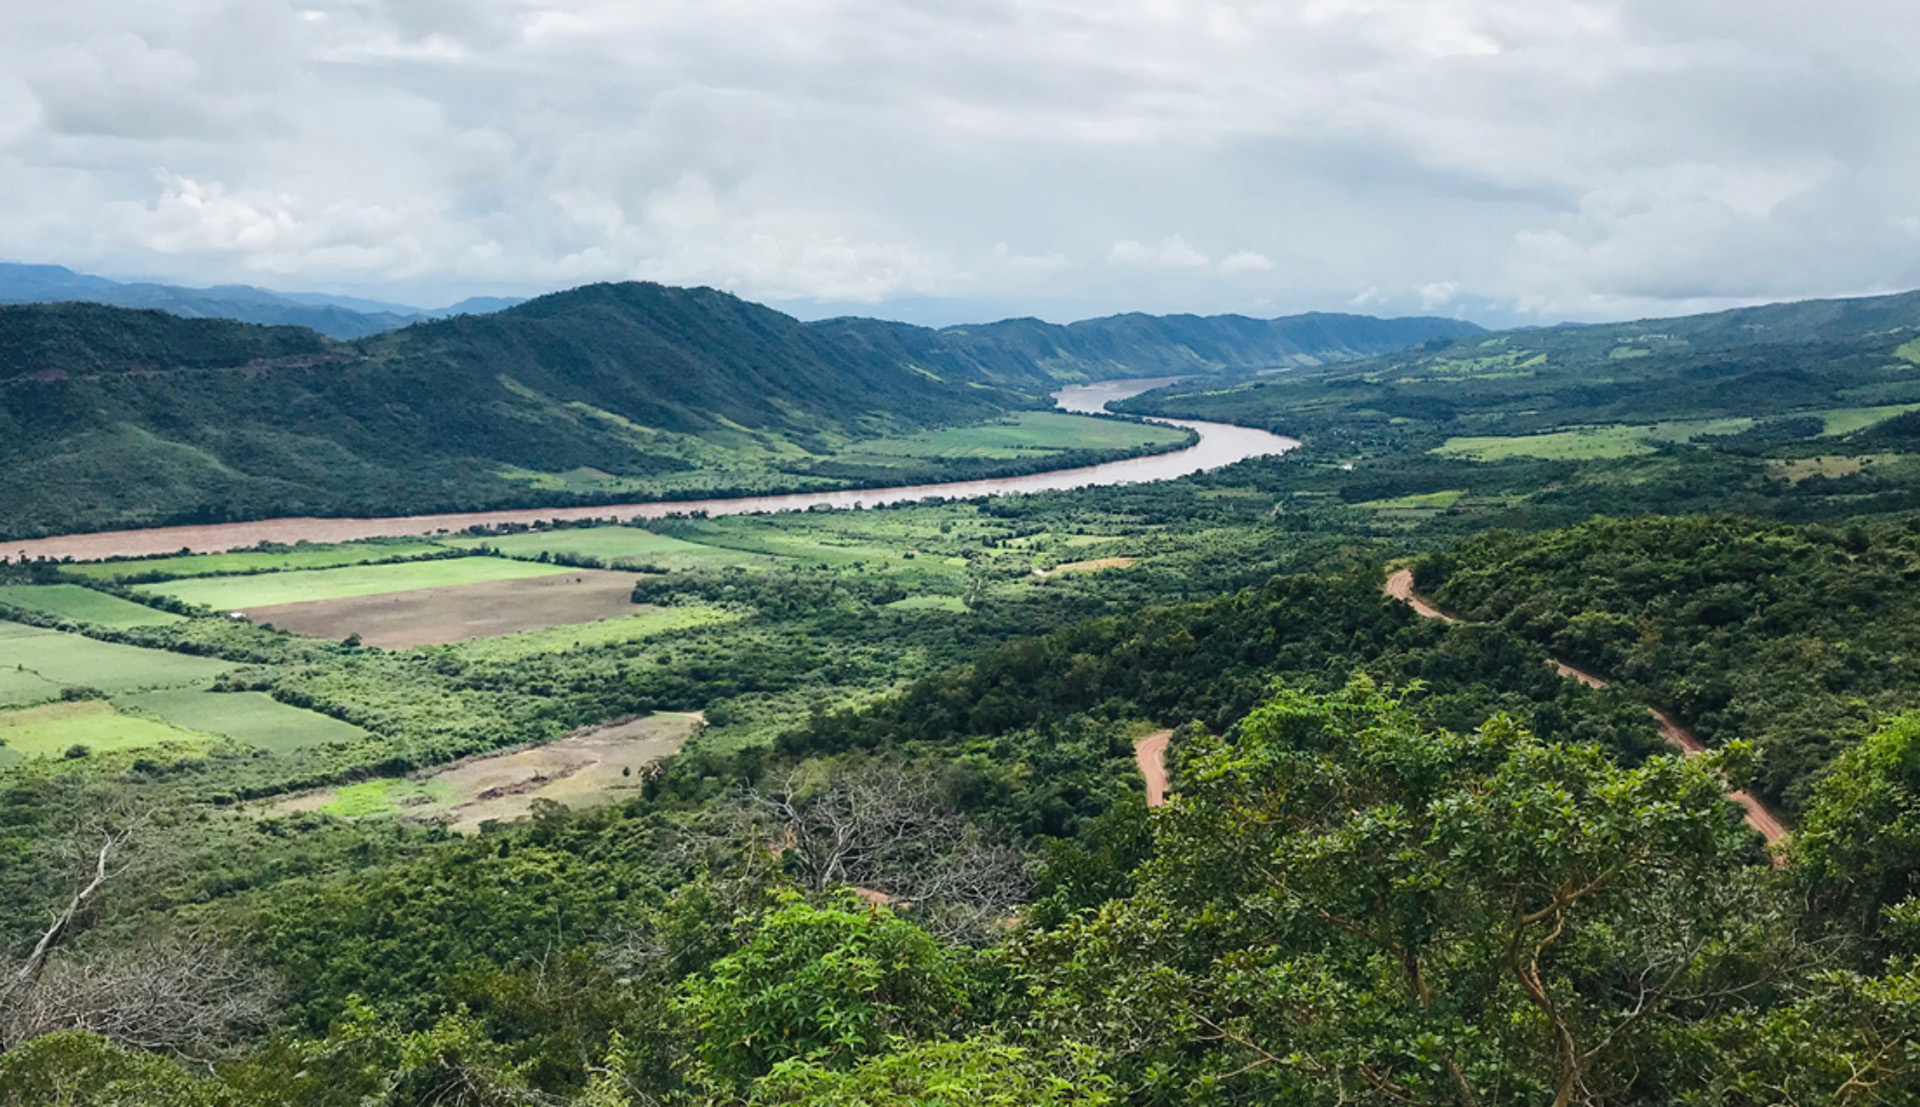 The Amazon rainforest in San Martin, Peru where the key, permanent crops are coffee and cocoa. In 2017, deforestation reached 155.914 hectares, with 60% of deforestation taking place in Ucayali, Madre de Dios, Huánuco and Loreto.